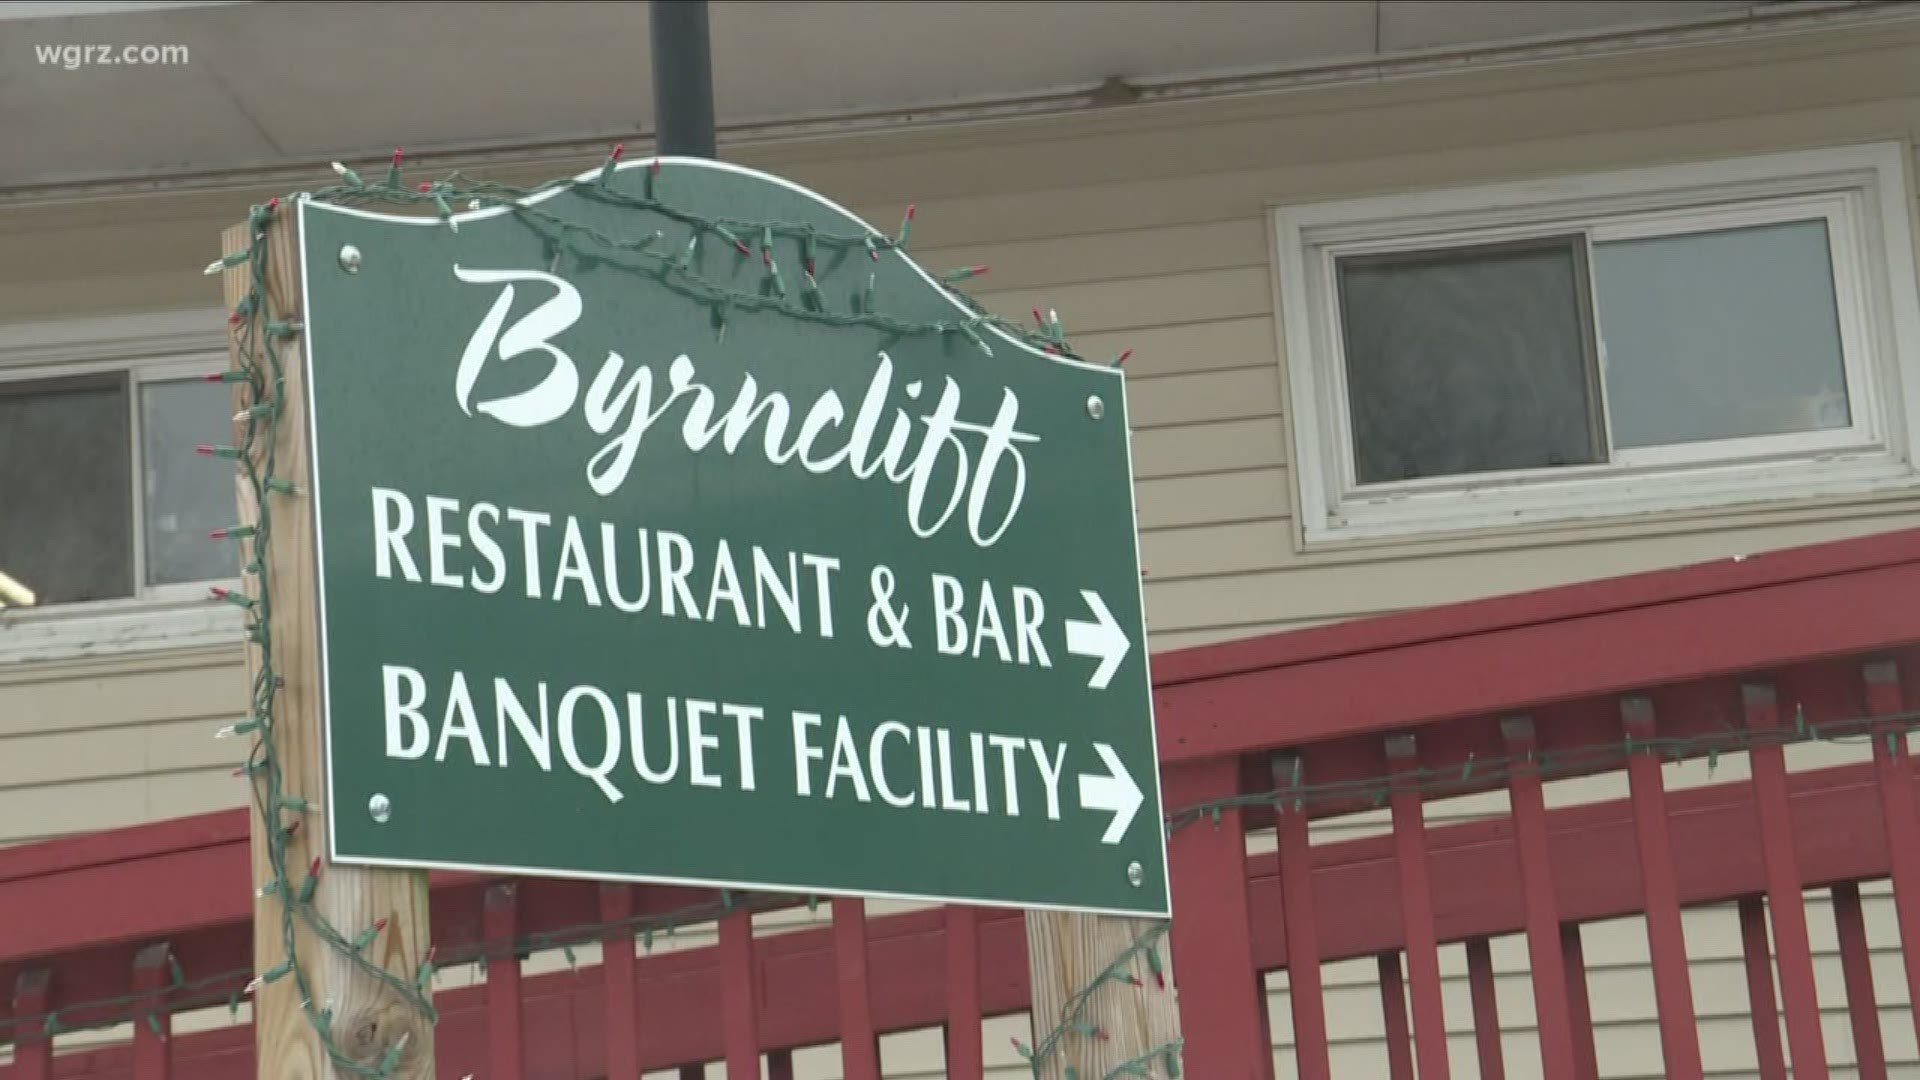 The announcement comes hours after GOP leaders met with candidates this morning at a secret location which turned out to be the Brynecliff Golf Club in Varysburg.